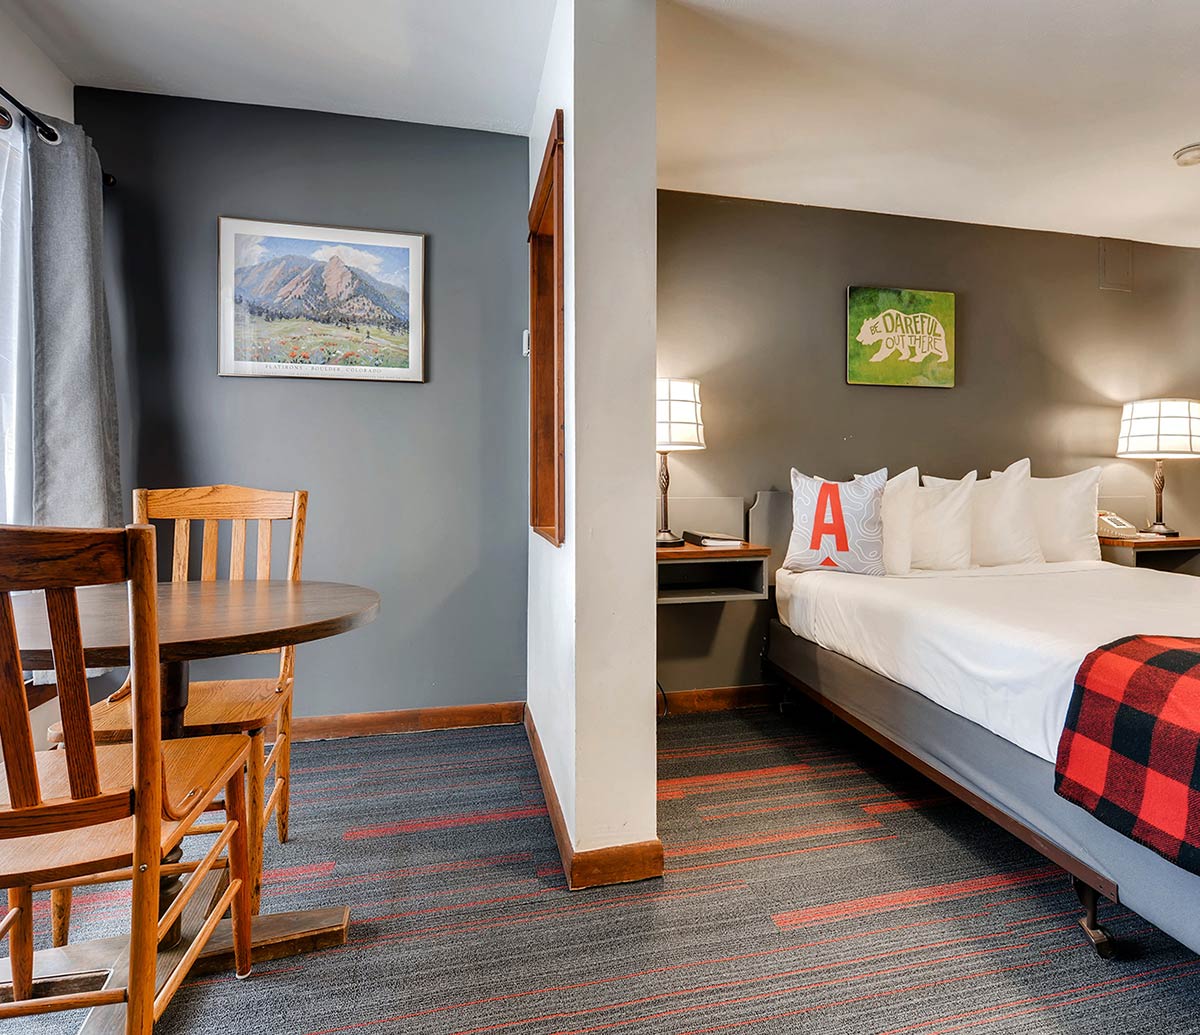 Affordable Queen Motel Room at A-Lodge in Boulder, Colorado